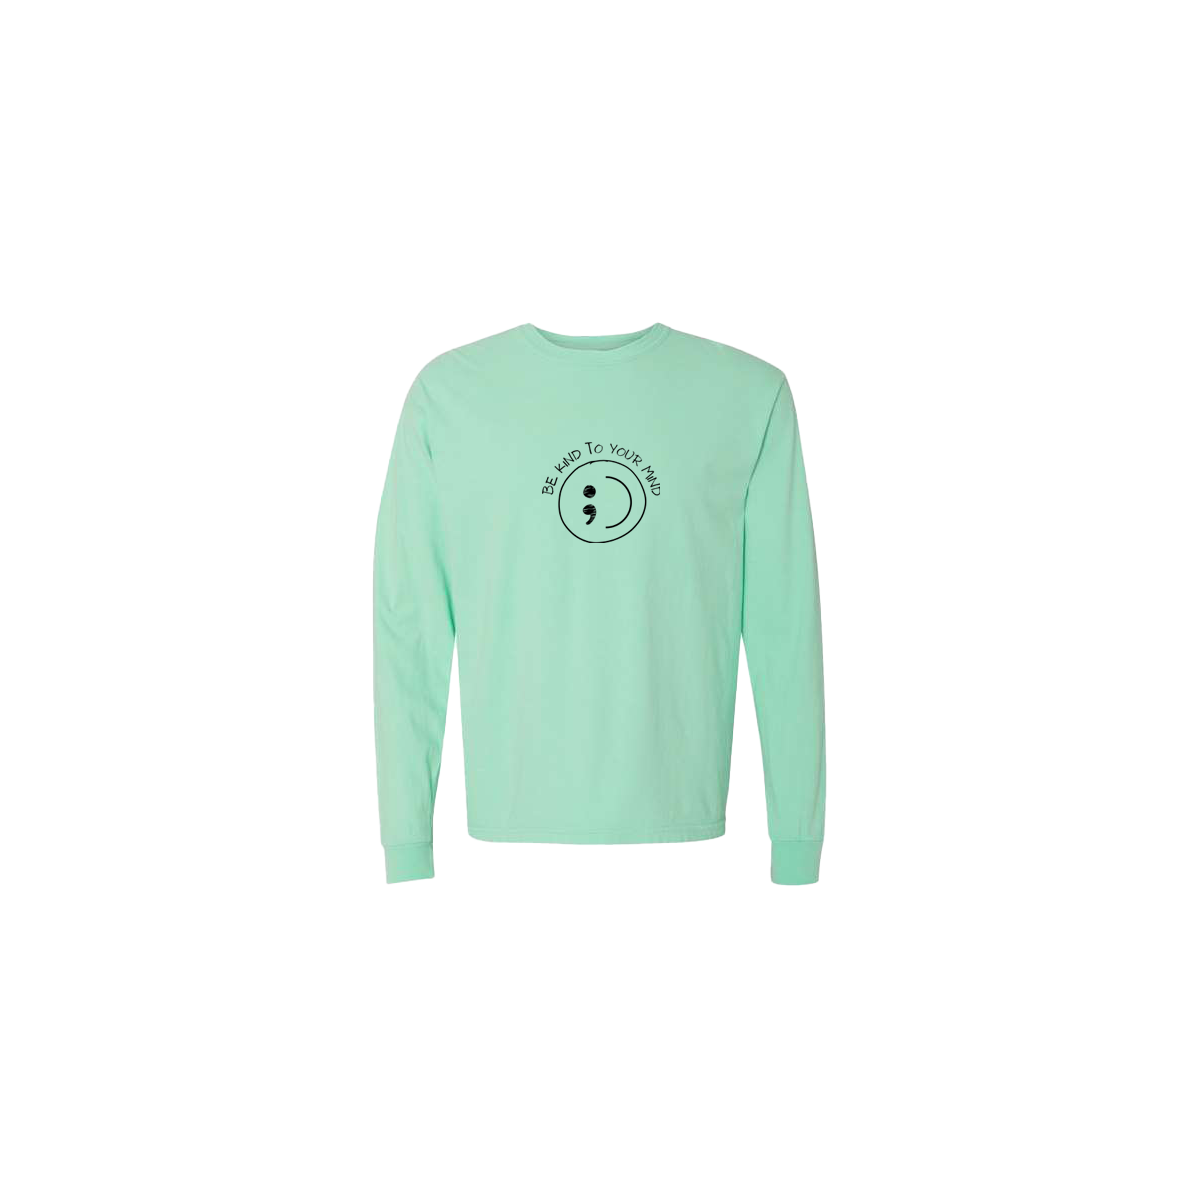 Be Kind To Your Mind Smiley Face Embroidered Mint Long Sleeve Tshirt - Mental Health Awareness Clothing